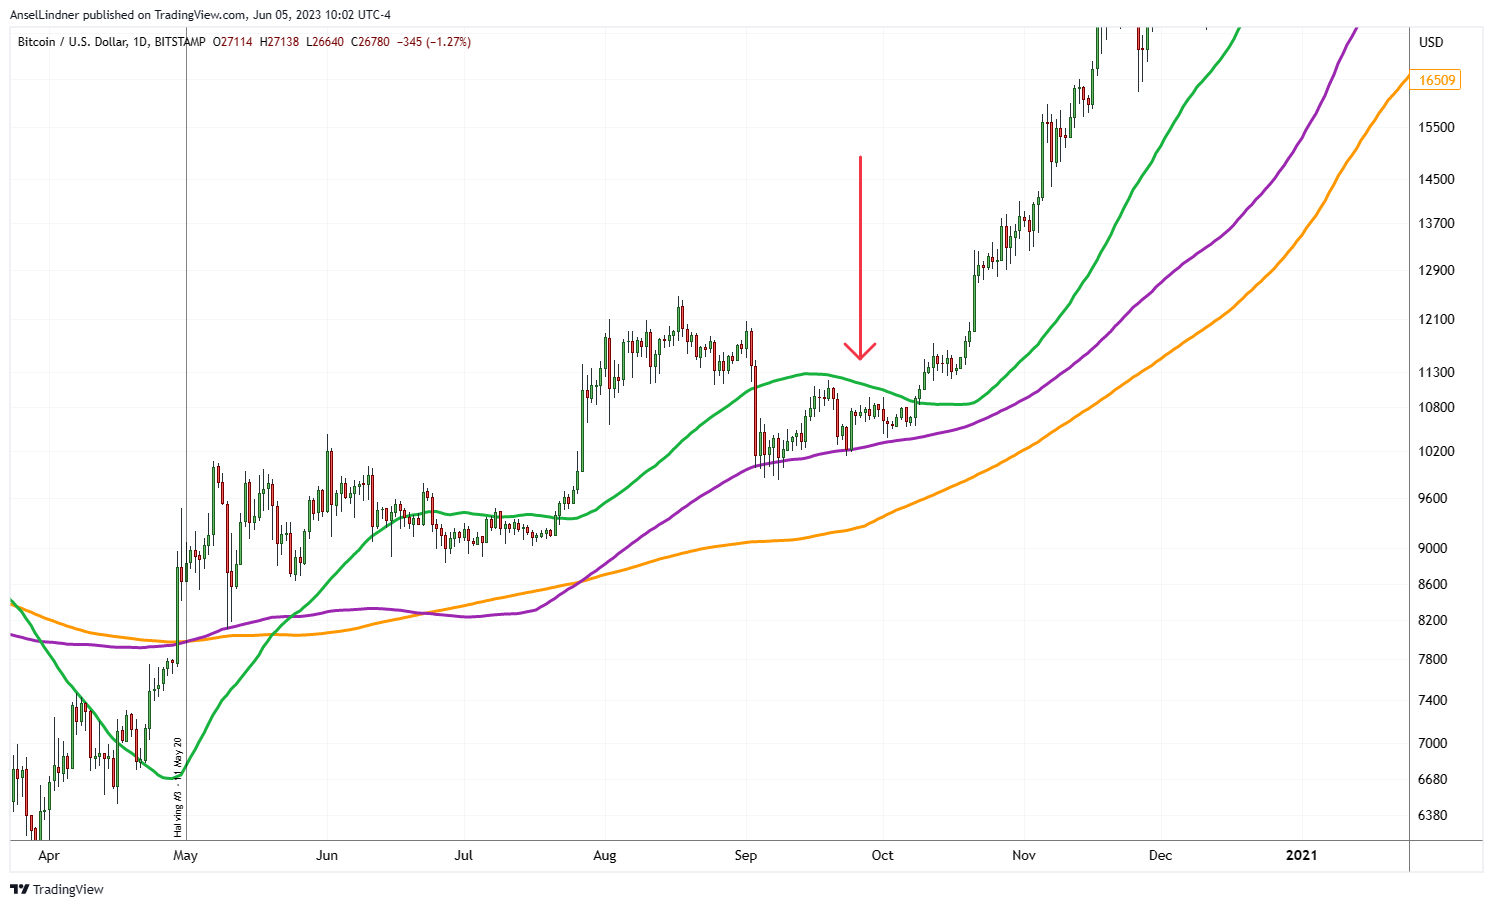 Bitcoin daily chart showing 2020